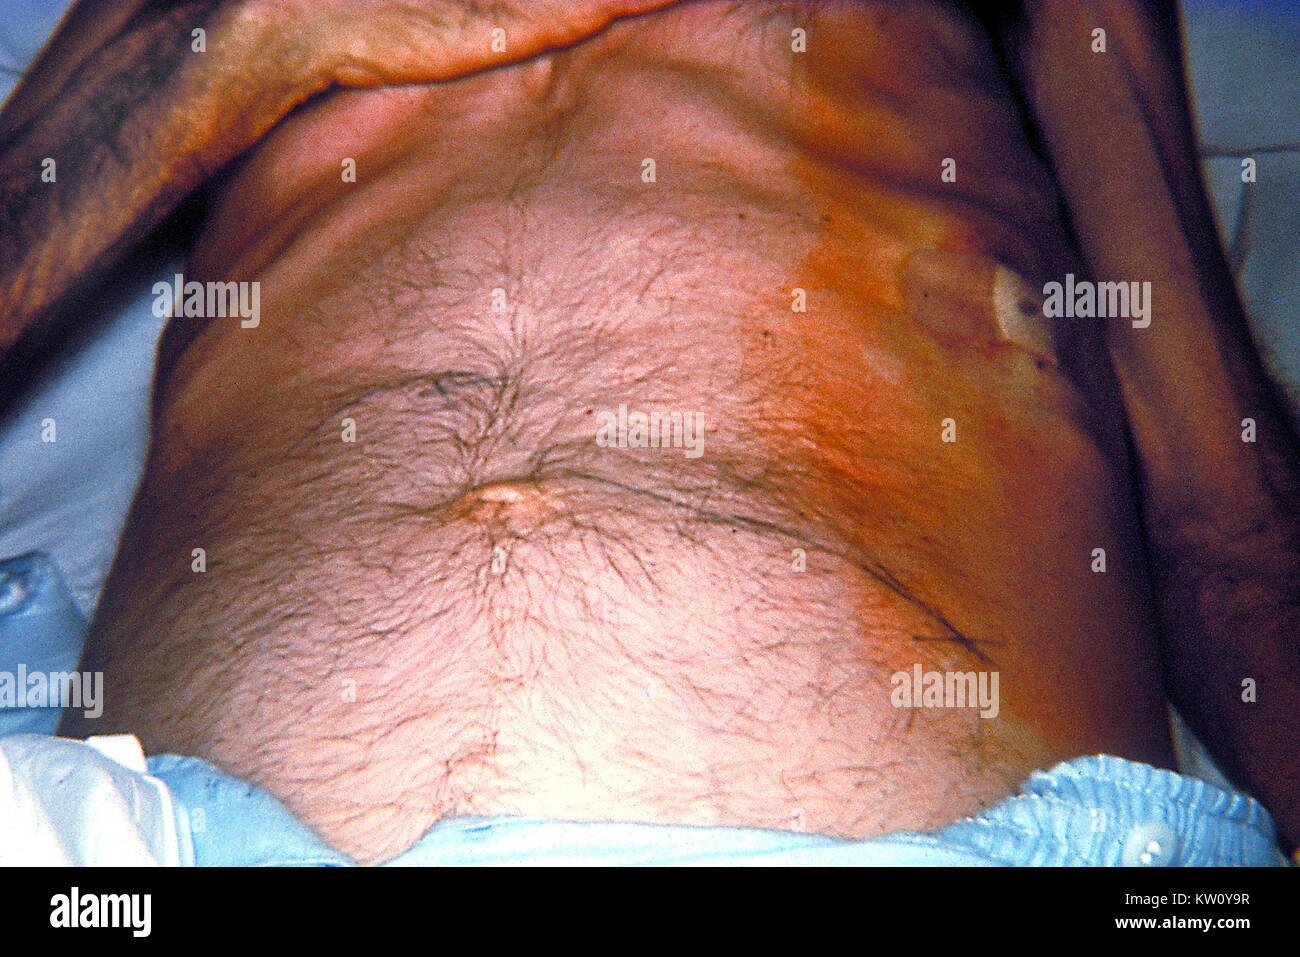 An anterior view of a patient with an abdominal carcinoid tumor. These very slow growing tumors usually originate from enterochromaffin cells of the small intestine, and are very rare. One quarter of the time they develop in the lungs. Image courtesy CDC/Emory University, Dr. Thomas Sellers, 1964. Stock Photo